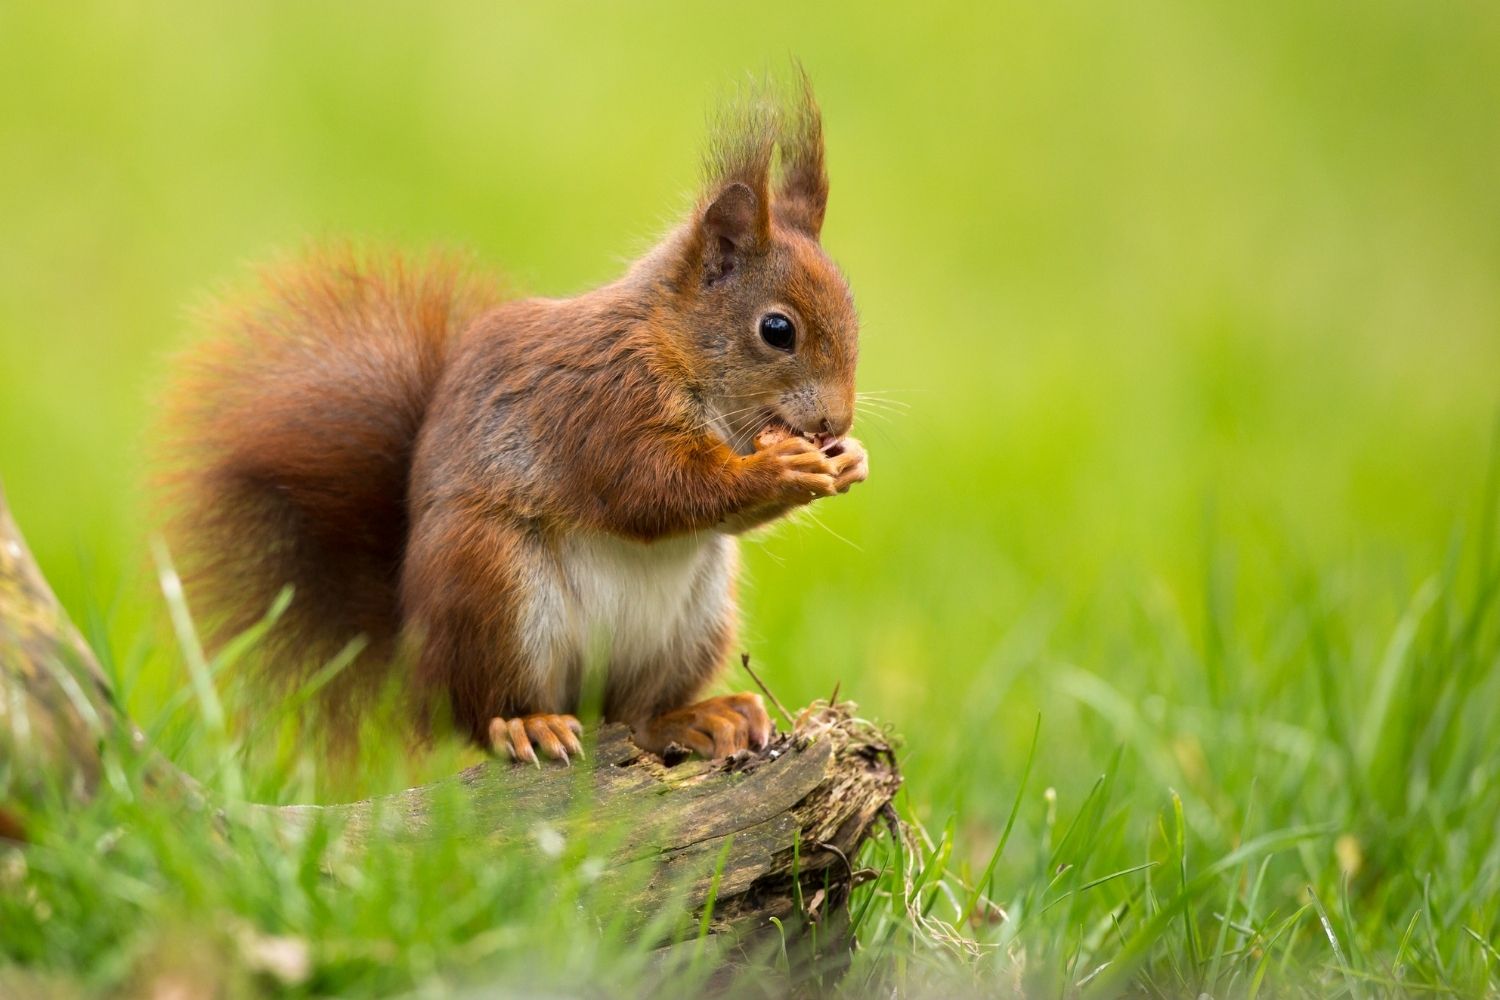 How Long Do Squirrels Live? Longer Than You’d Think